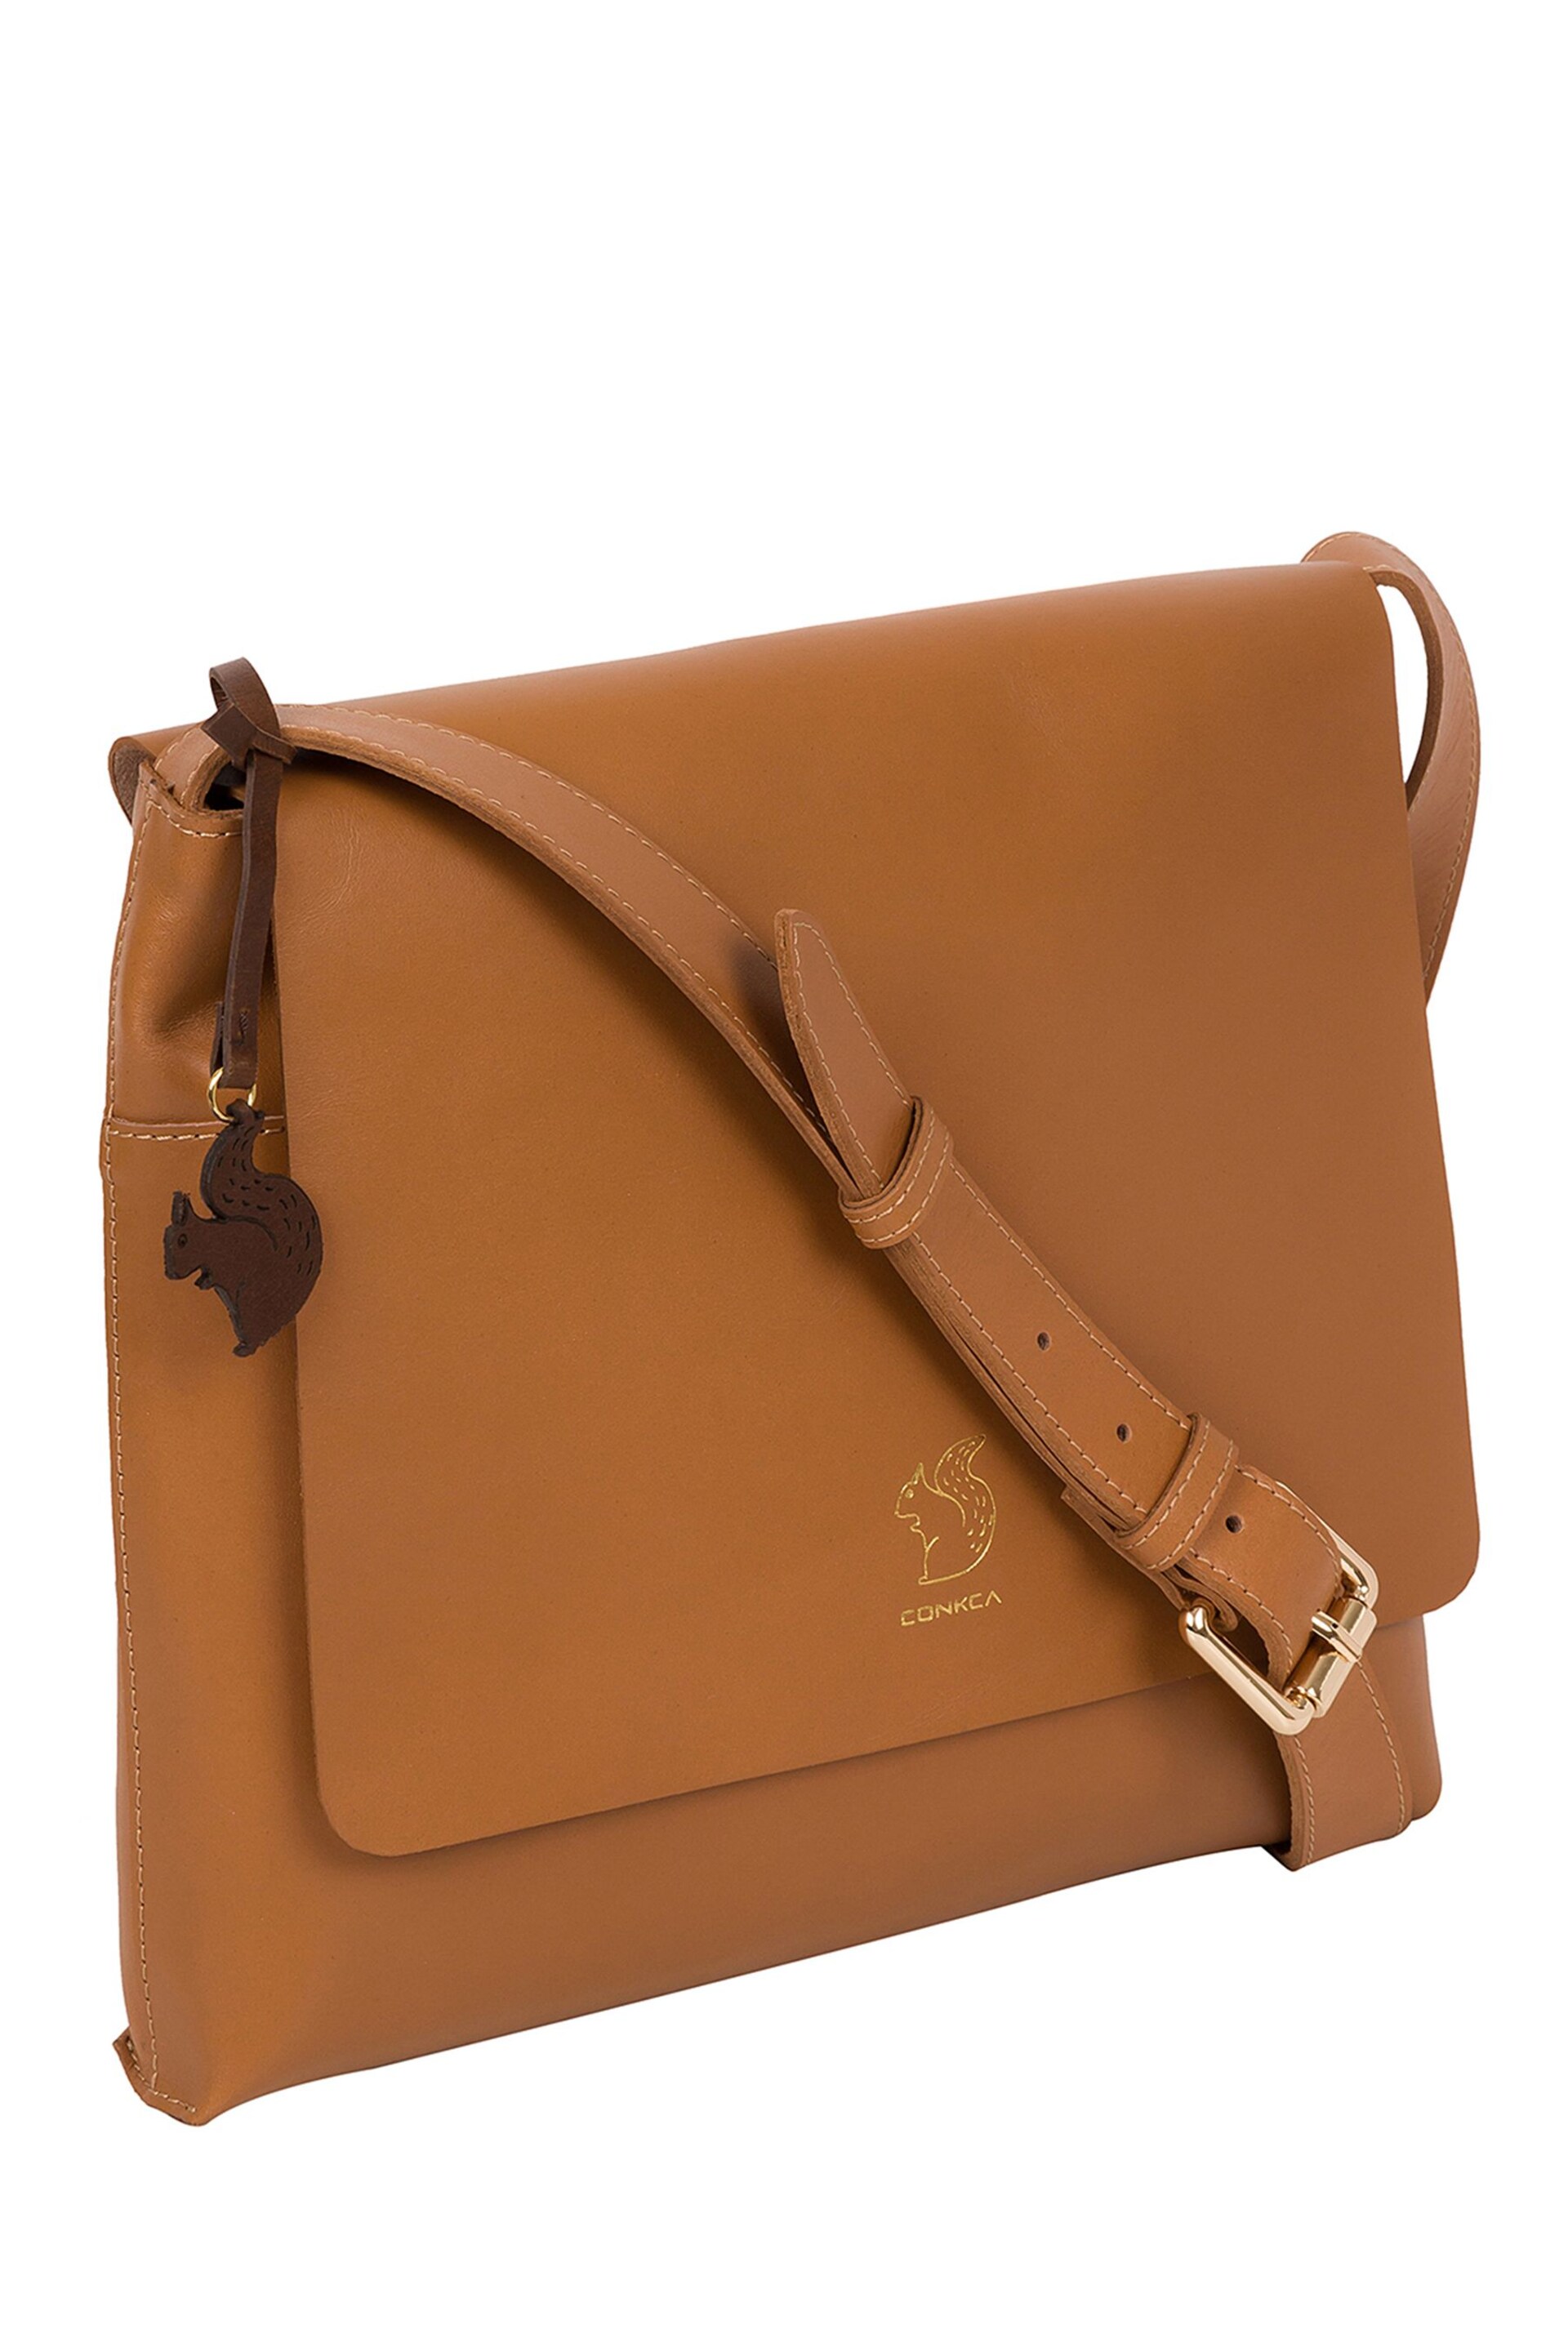 Conkca Bale Vegetable-Tanned Leather Cross-Body Bag - Image 5 of 5